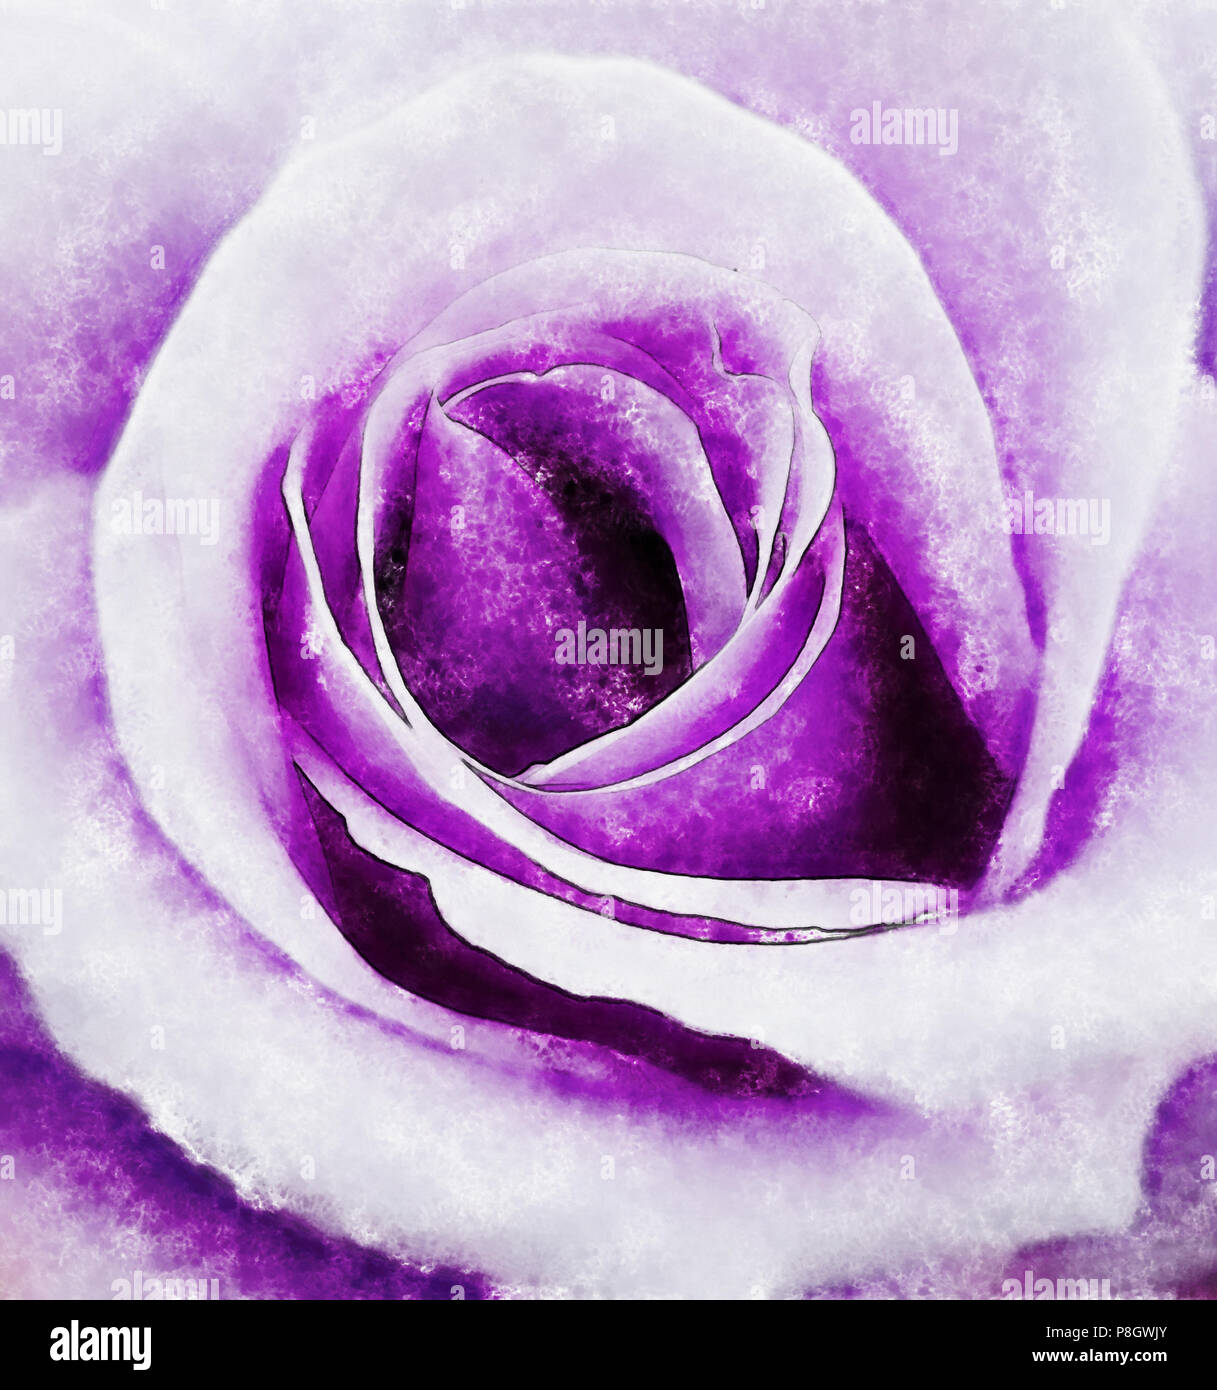 Closeup Violet Rose Fine Art, Digital Painting Created By Hand Using Several Techniques To Resemble Watercolor On Paper Stock Photo - Alamy